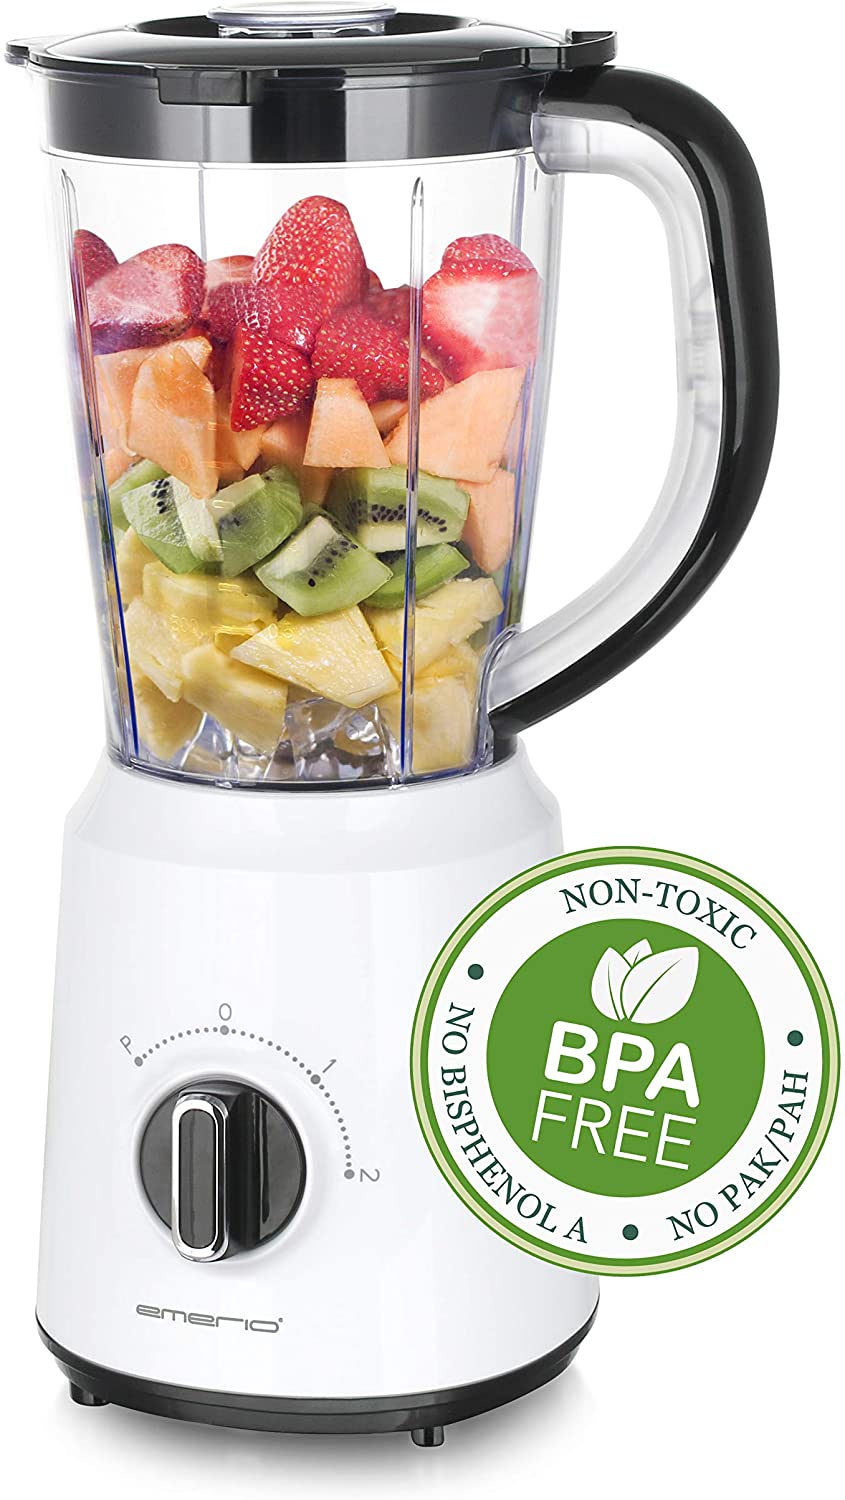 Emerio Blender, BPA-Free, Crush Ice Function, 1.5 L Container, 2 Speeds + Pulse Function, Stainless Steel Knife Unit, Safety Switch, Dishwasher-Safe, 500 Watt